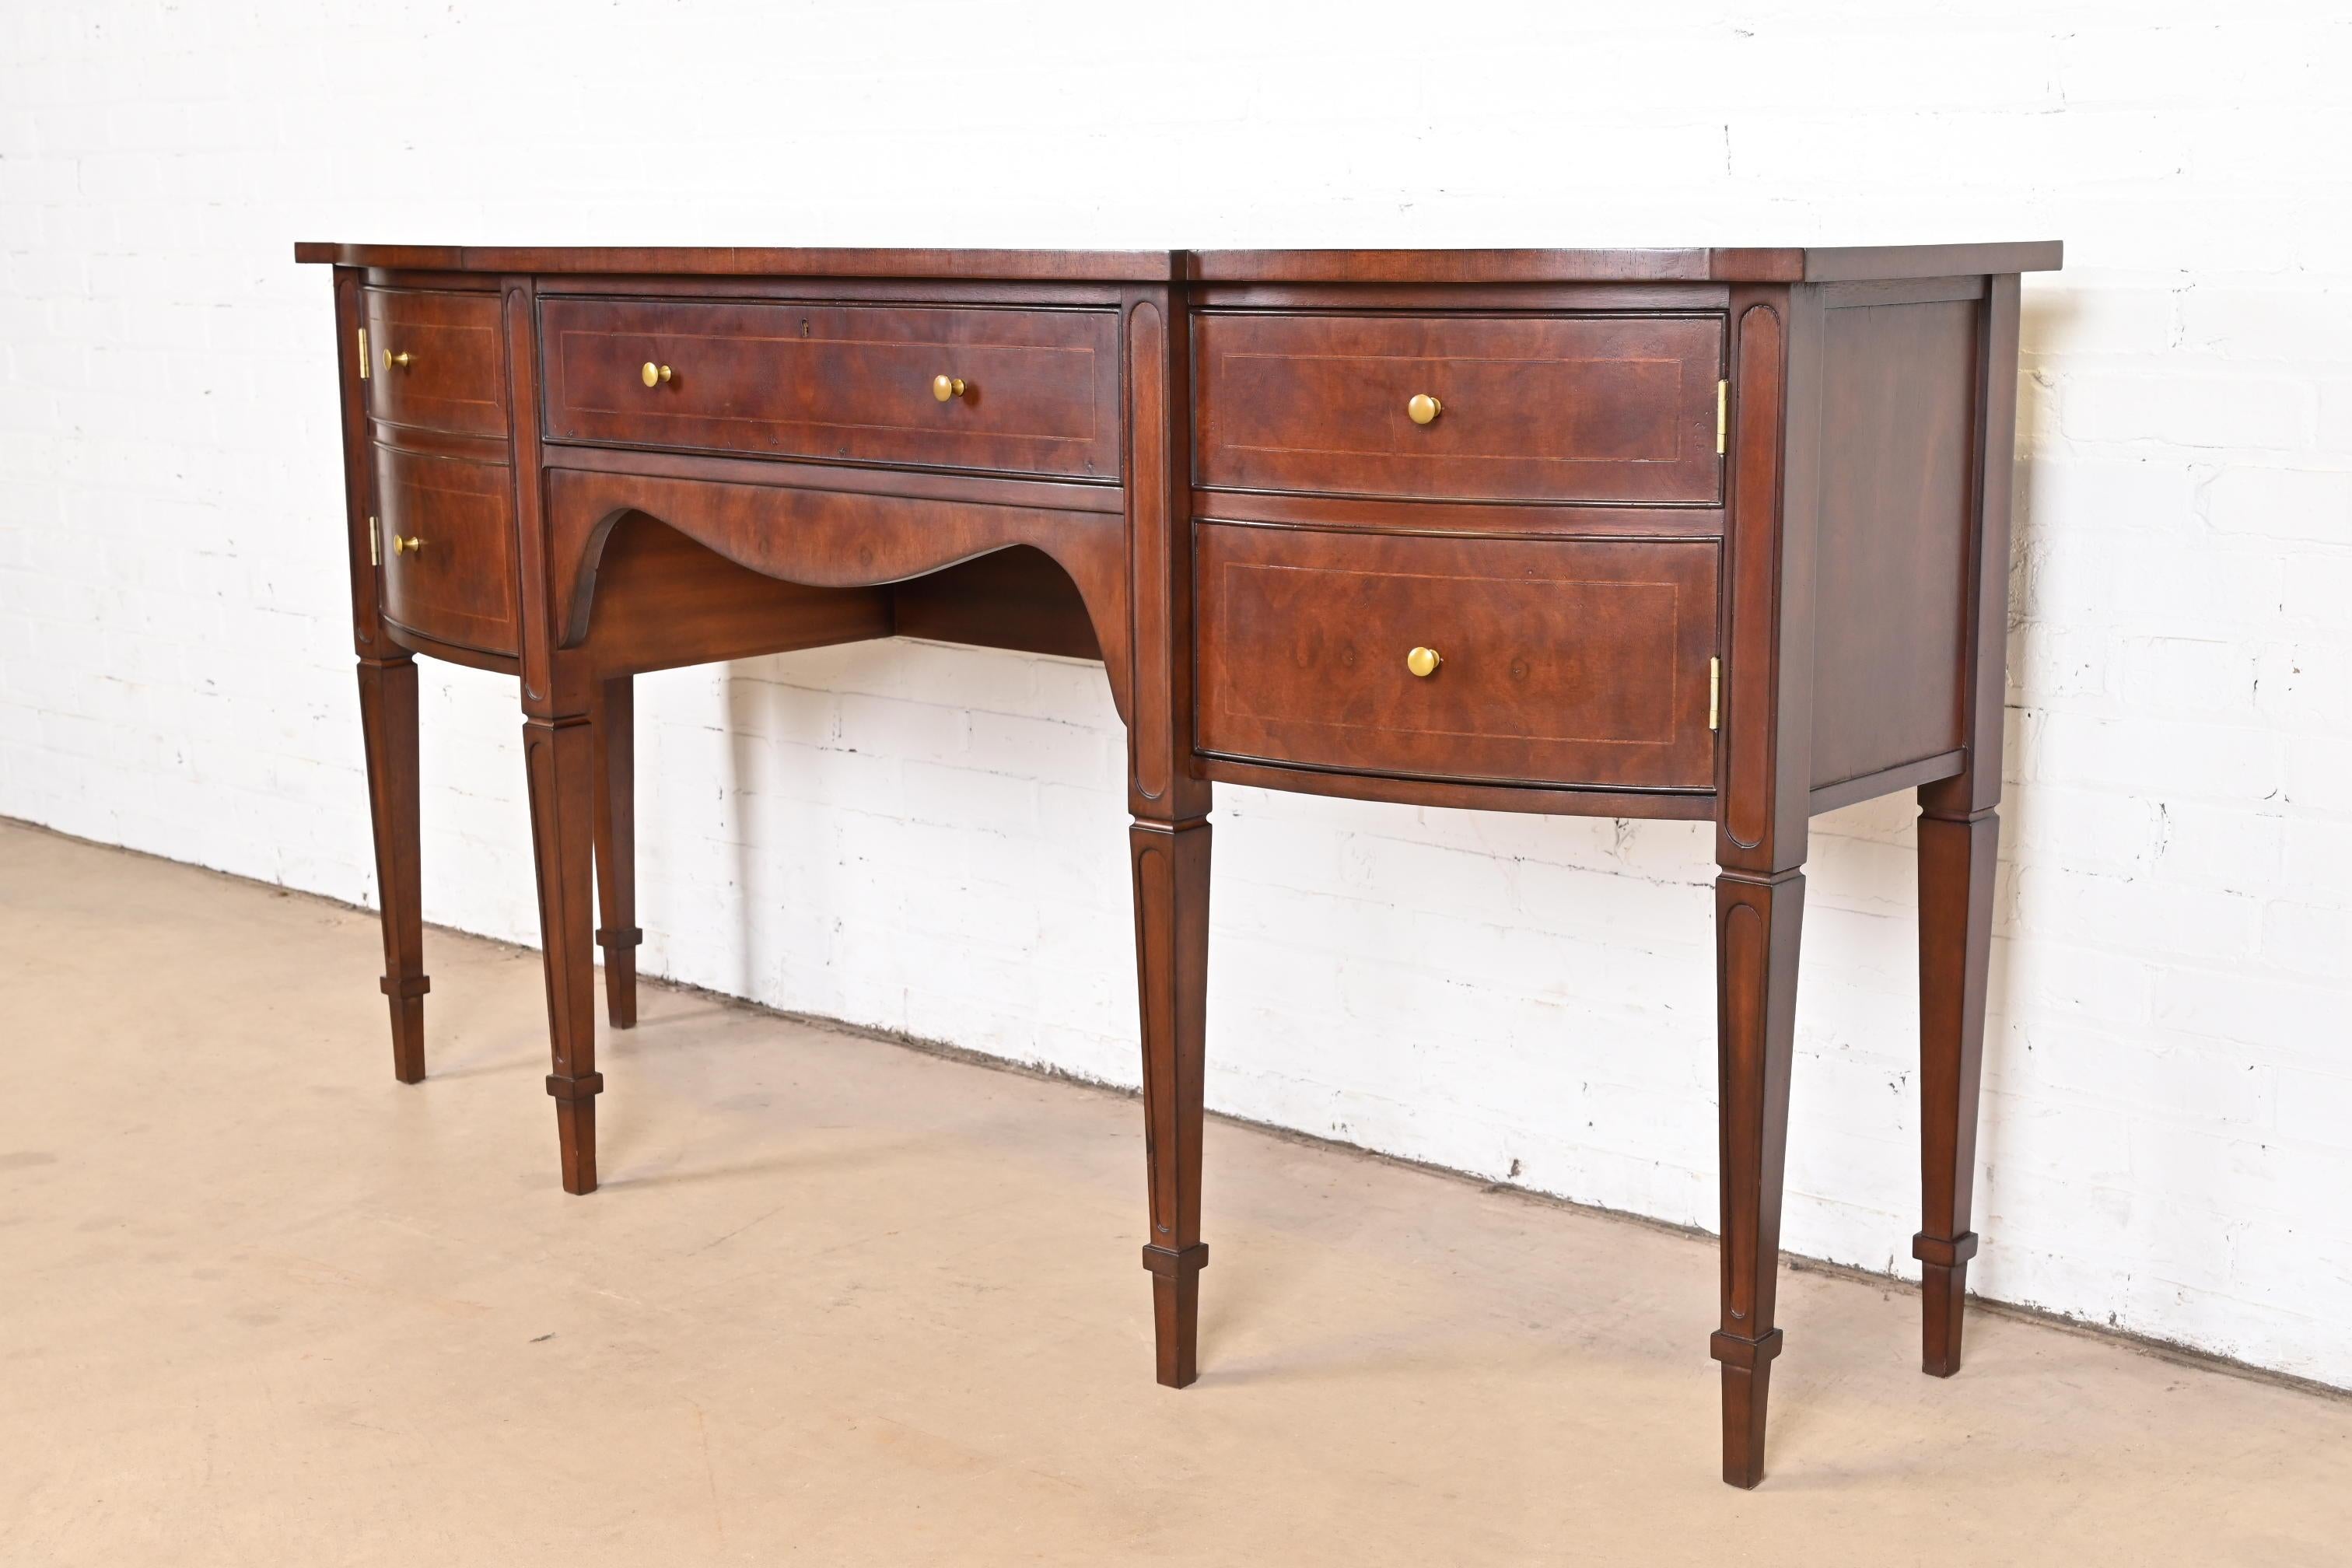 Baker Furniture Style Federal Inlaid Mahogany Sideboard Credenza In Good Condition For Sale In South Bend, IN